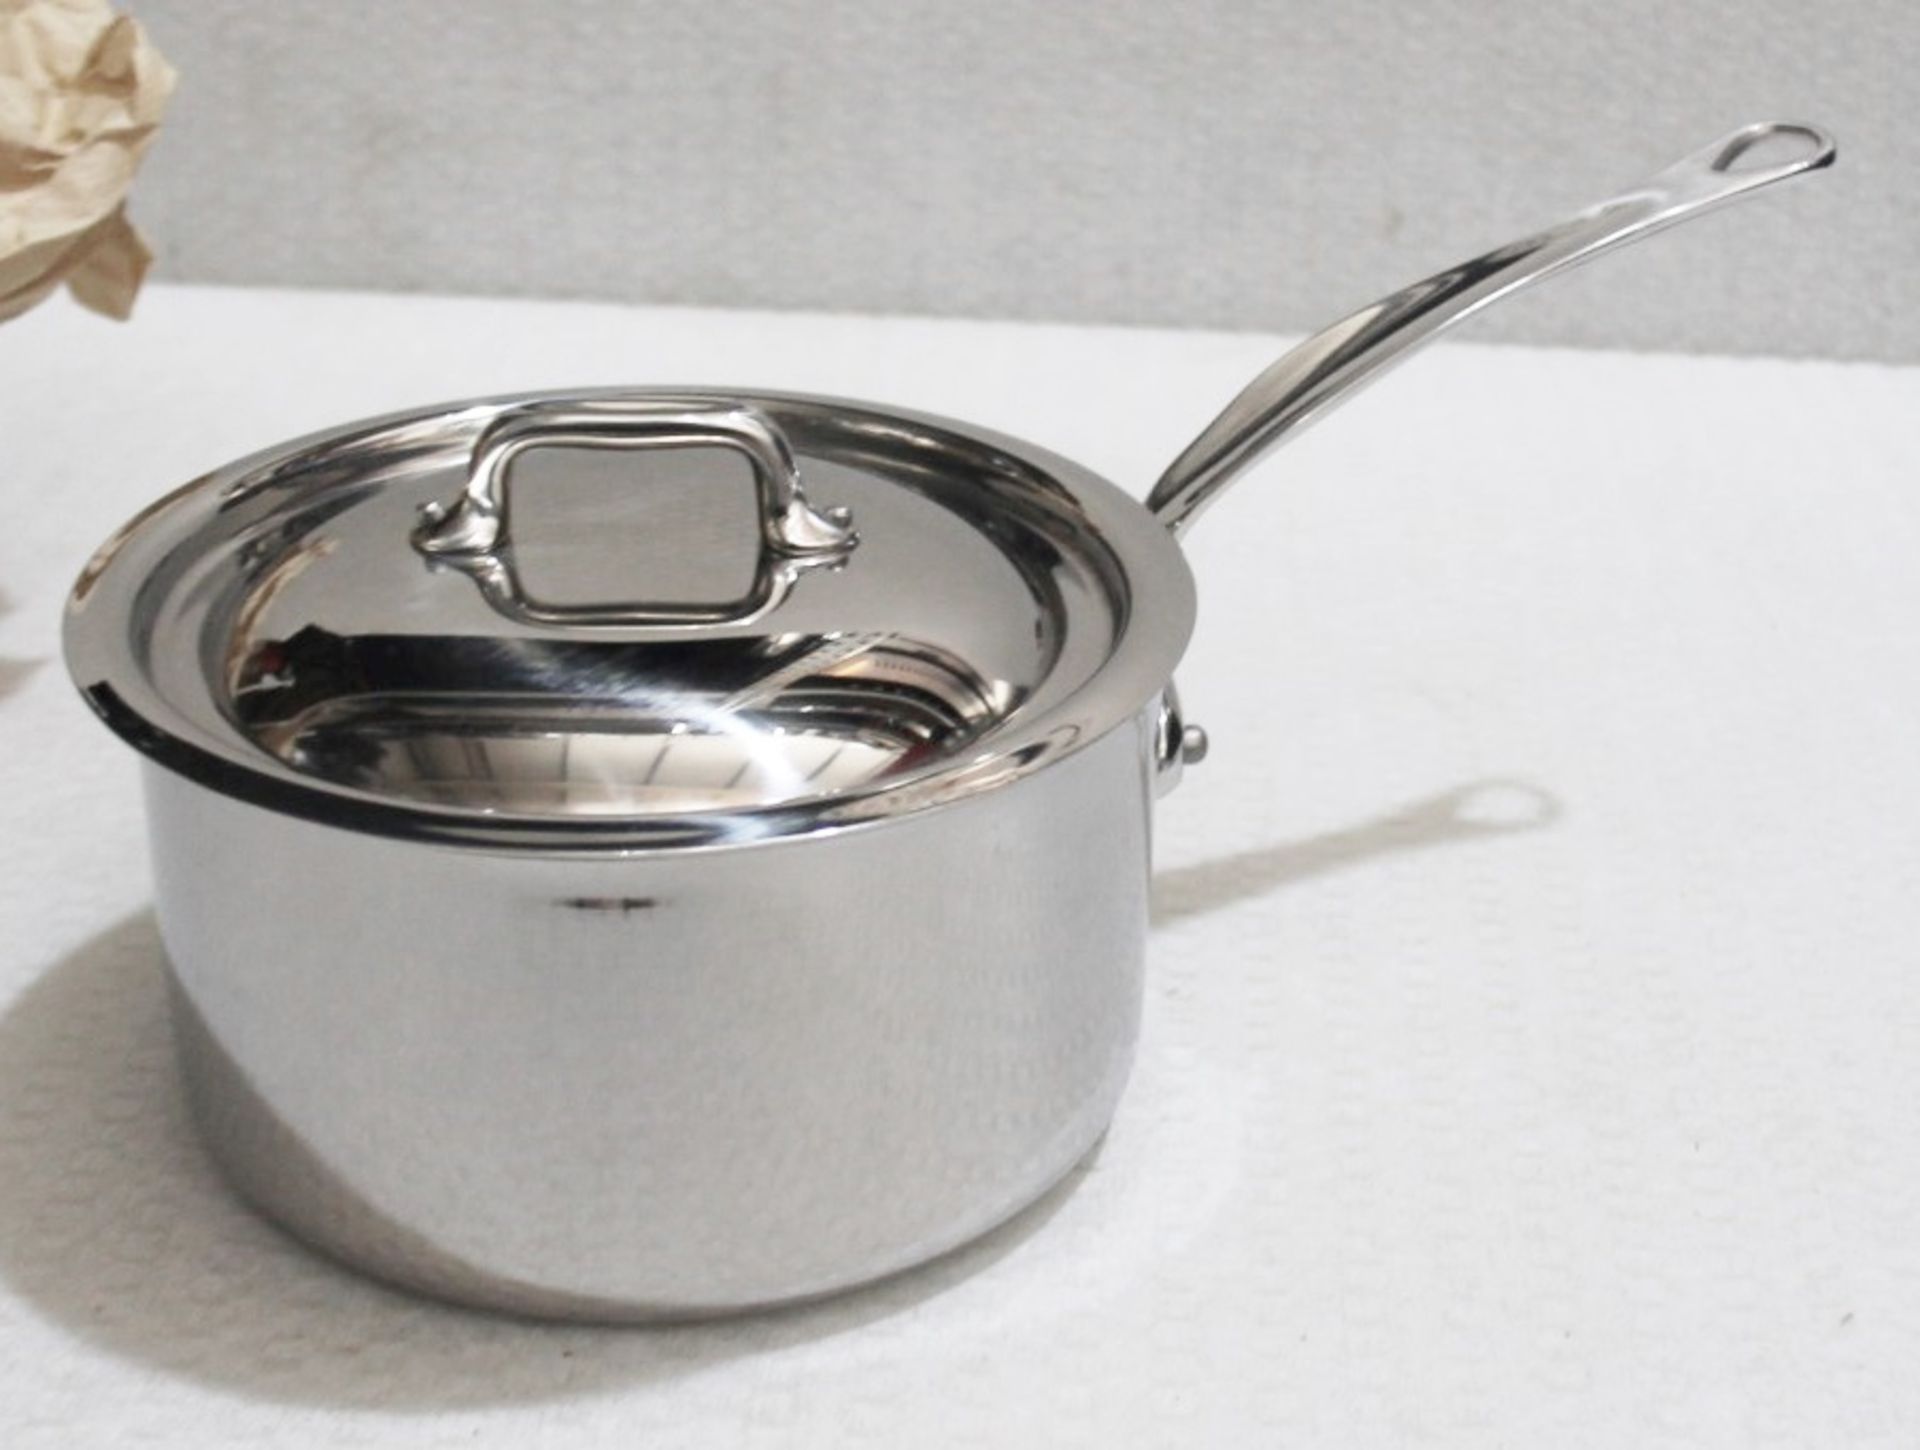 1 x MAUVIEL 'M'Cook' 6-Piece Luxury Stainless Steel Cookware Set With Crate - Original Price £1,239 - Image 14 of 17